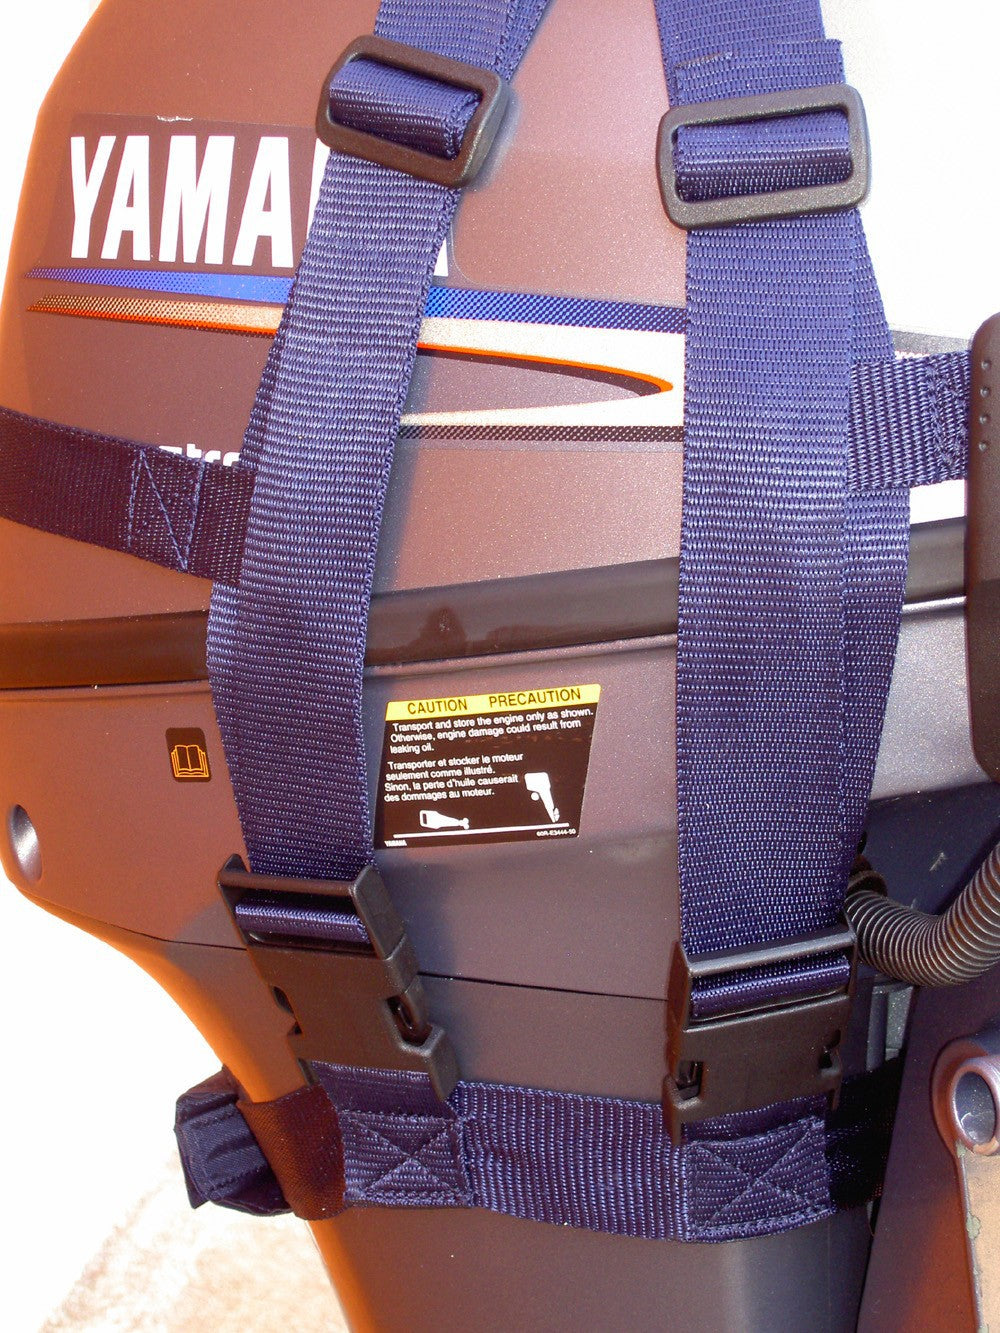 Lifting Harness for Outboard Motors